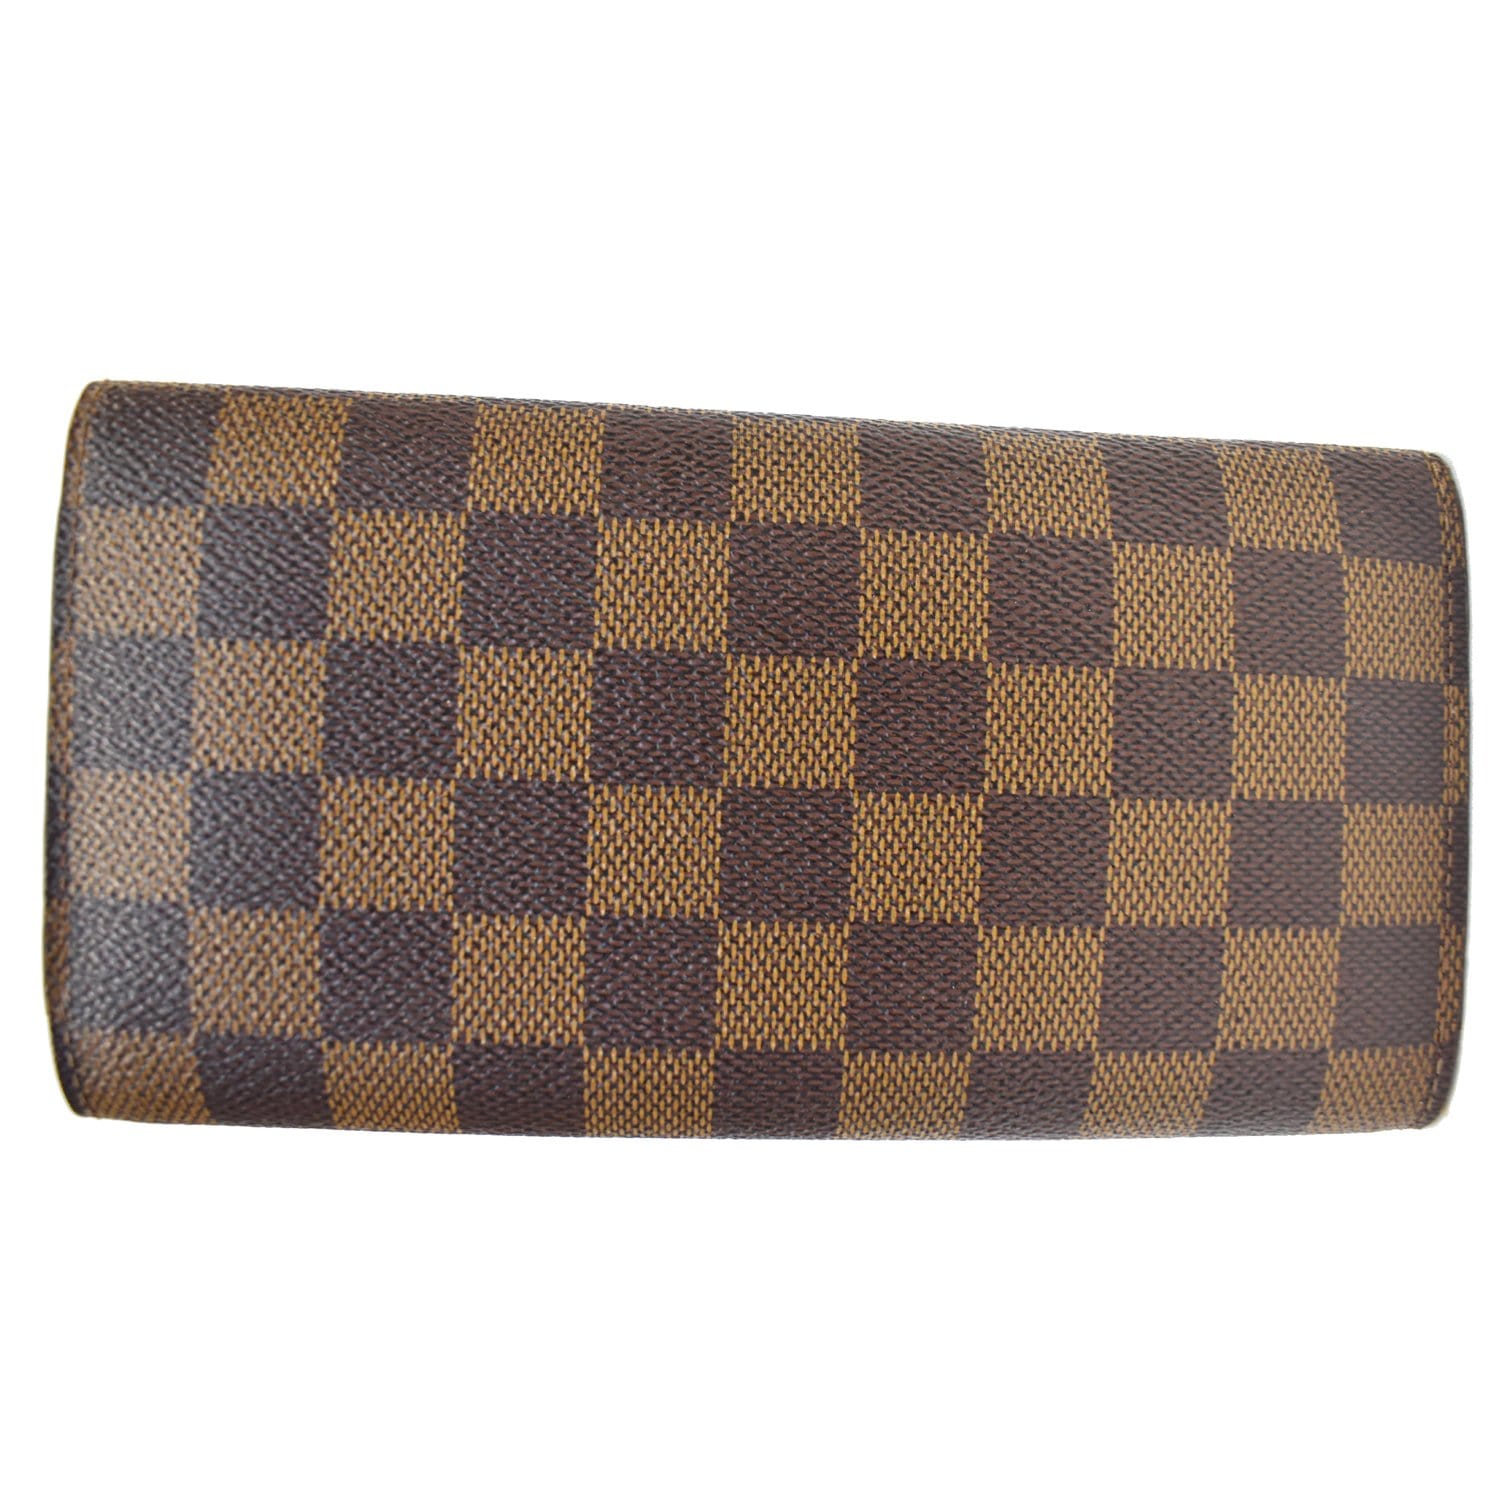 Louis Vuitton - Authenticated Emilie Wallet - Cotton Brown Gingham for Women, Very Good Condition